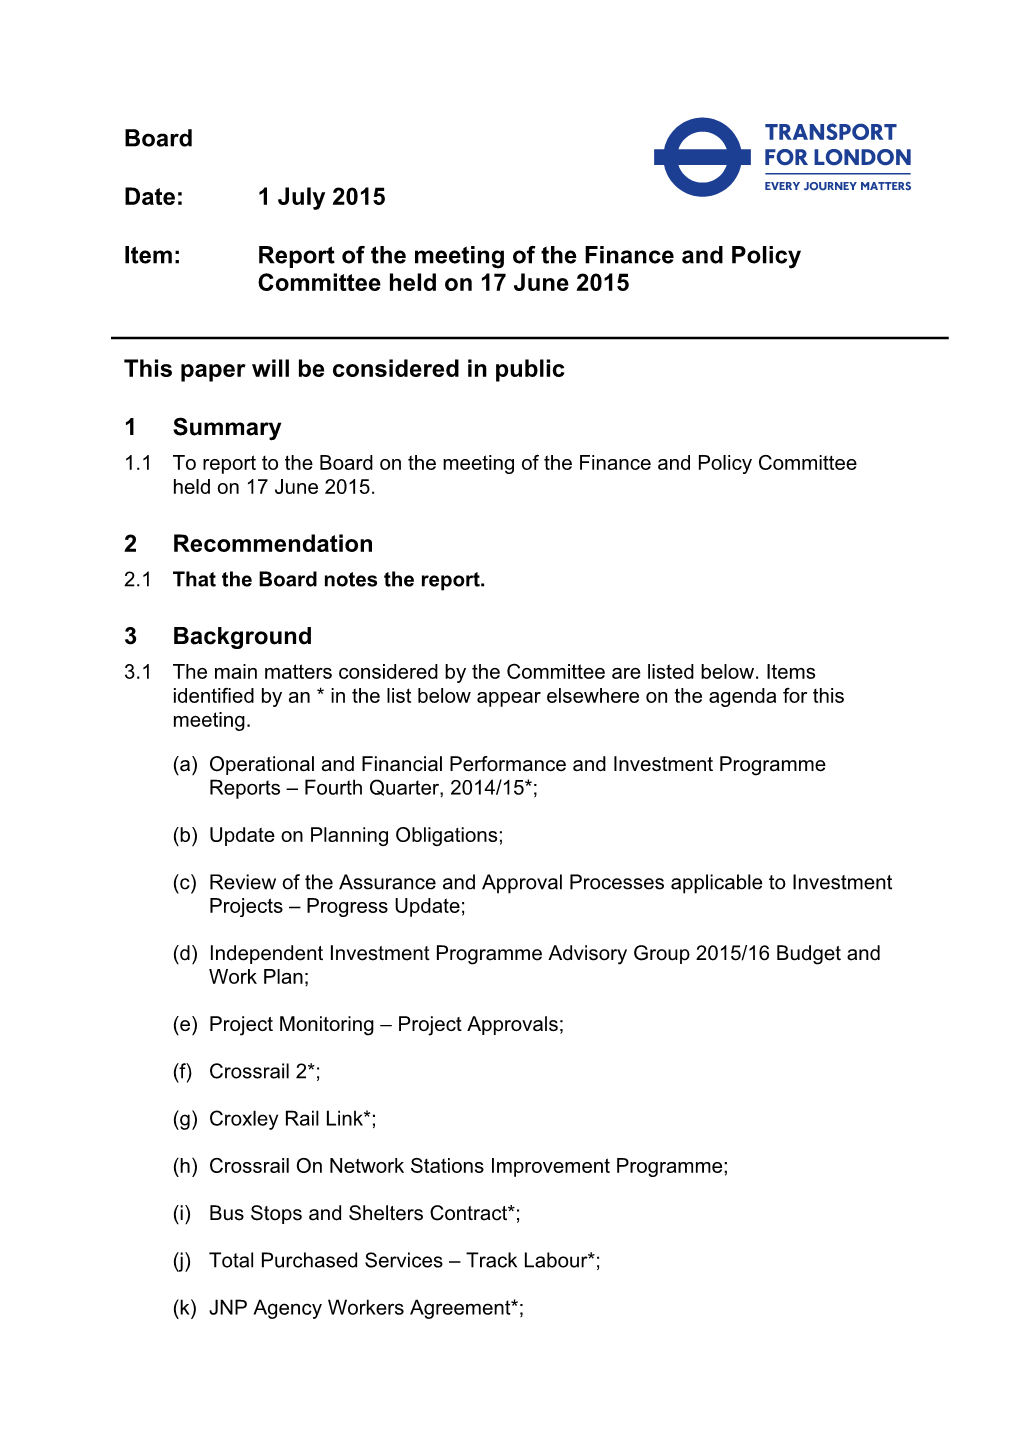 Board Date: 1 July 2015 Item: Report of the Meeting of the Finance And